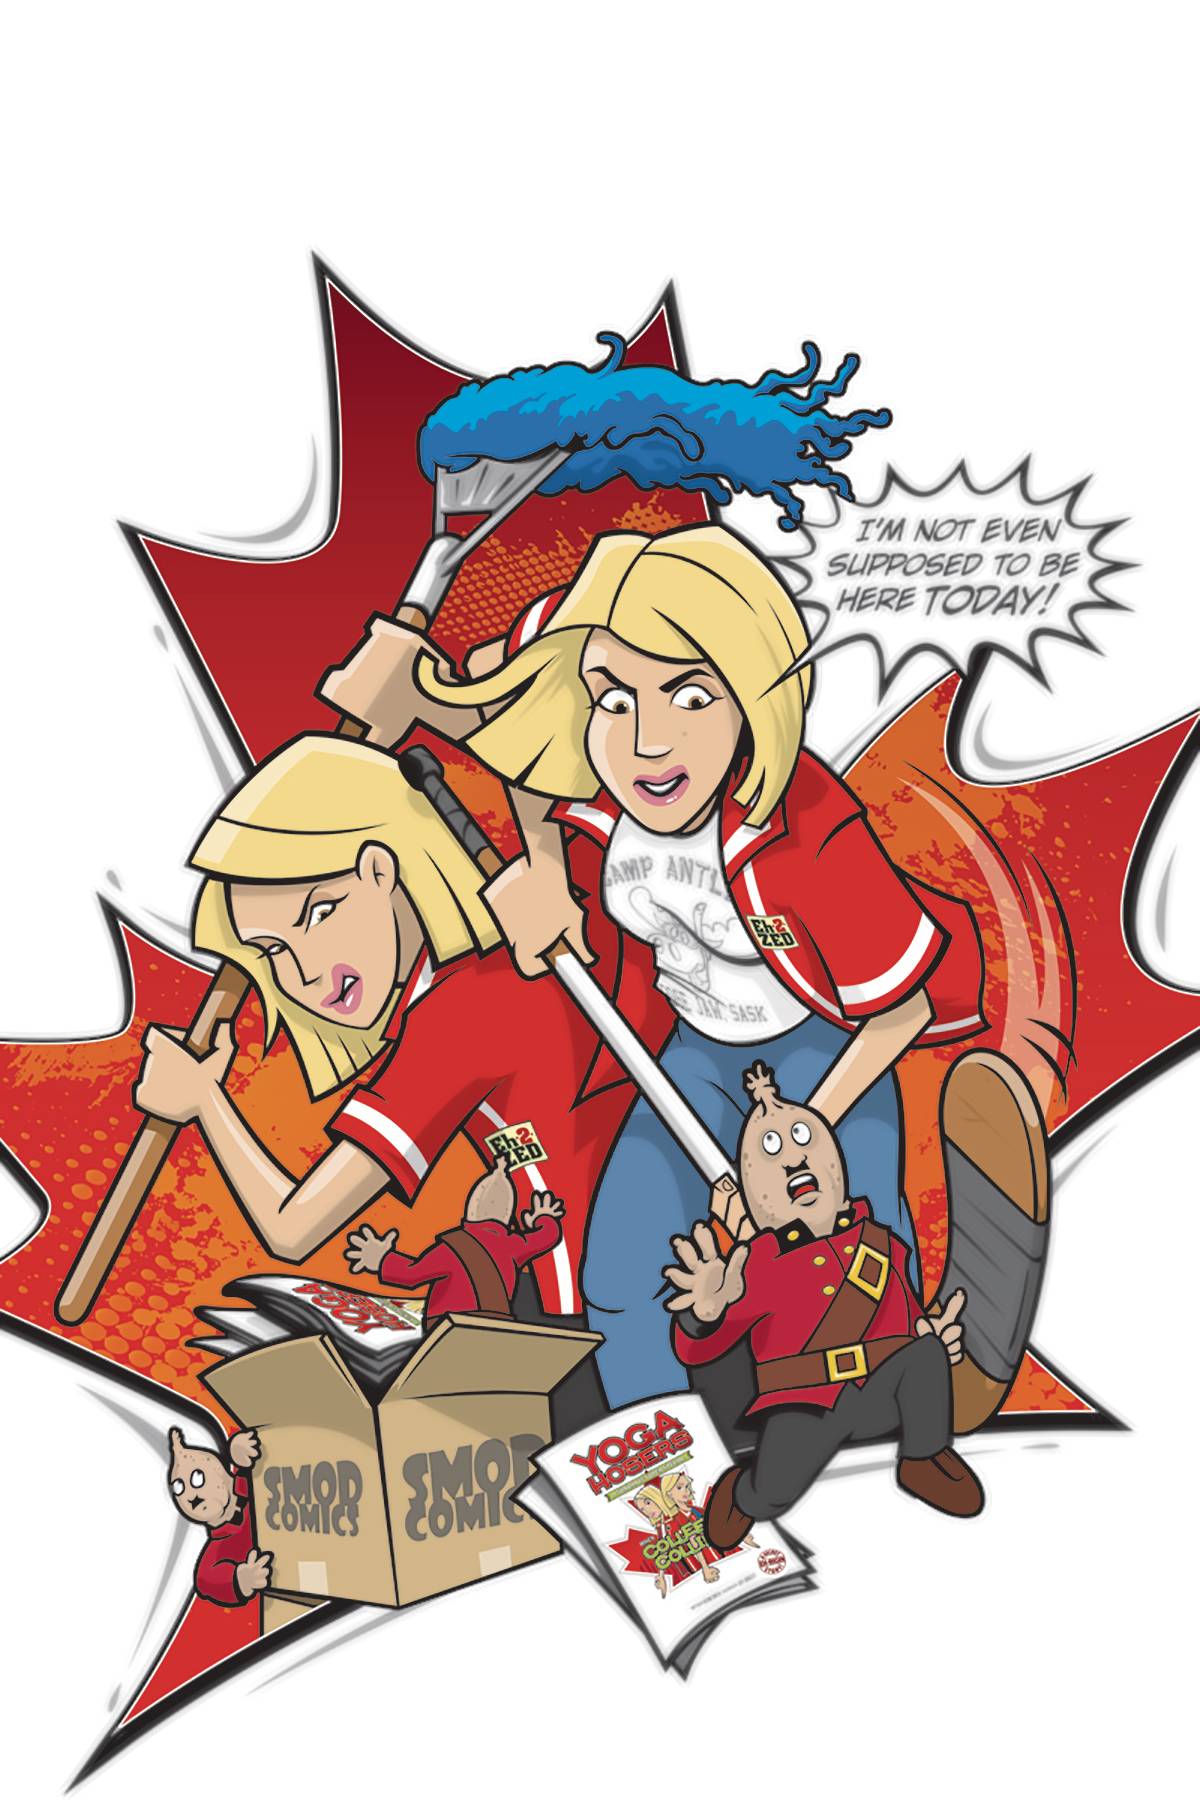 Kevin Smith Yoga Hosers Cover B 10 Copy Virgin Incentive